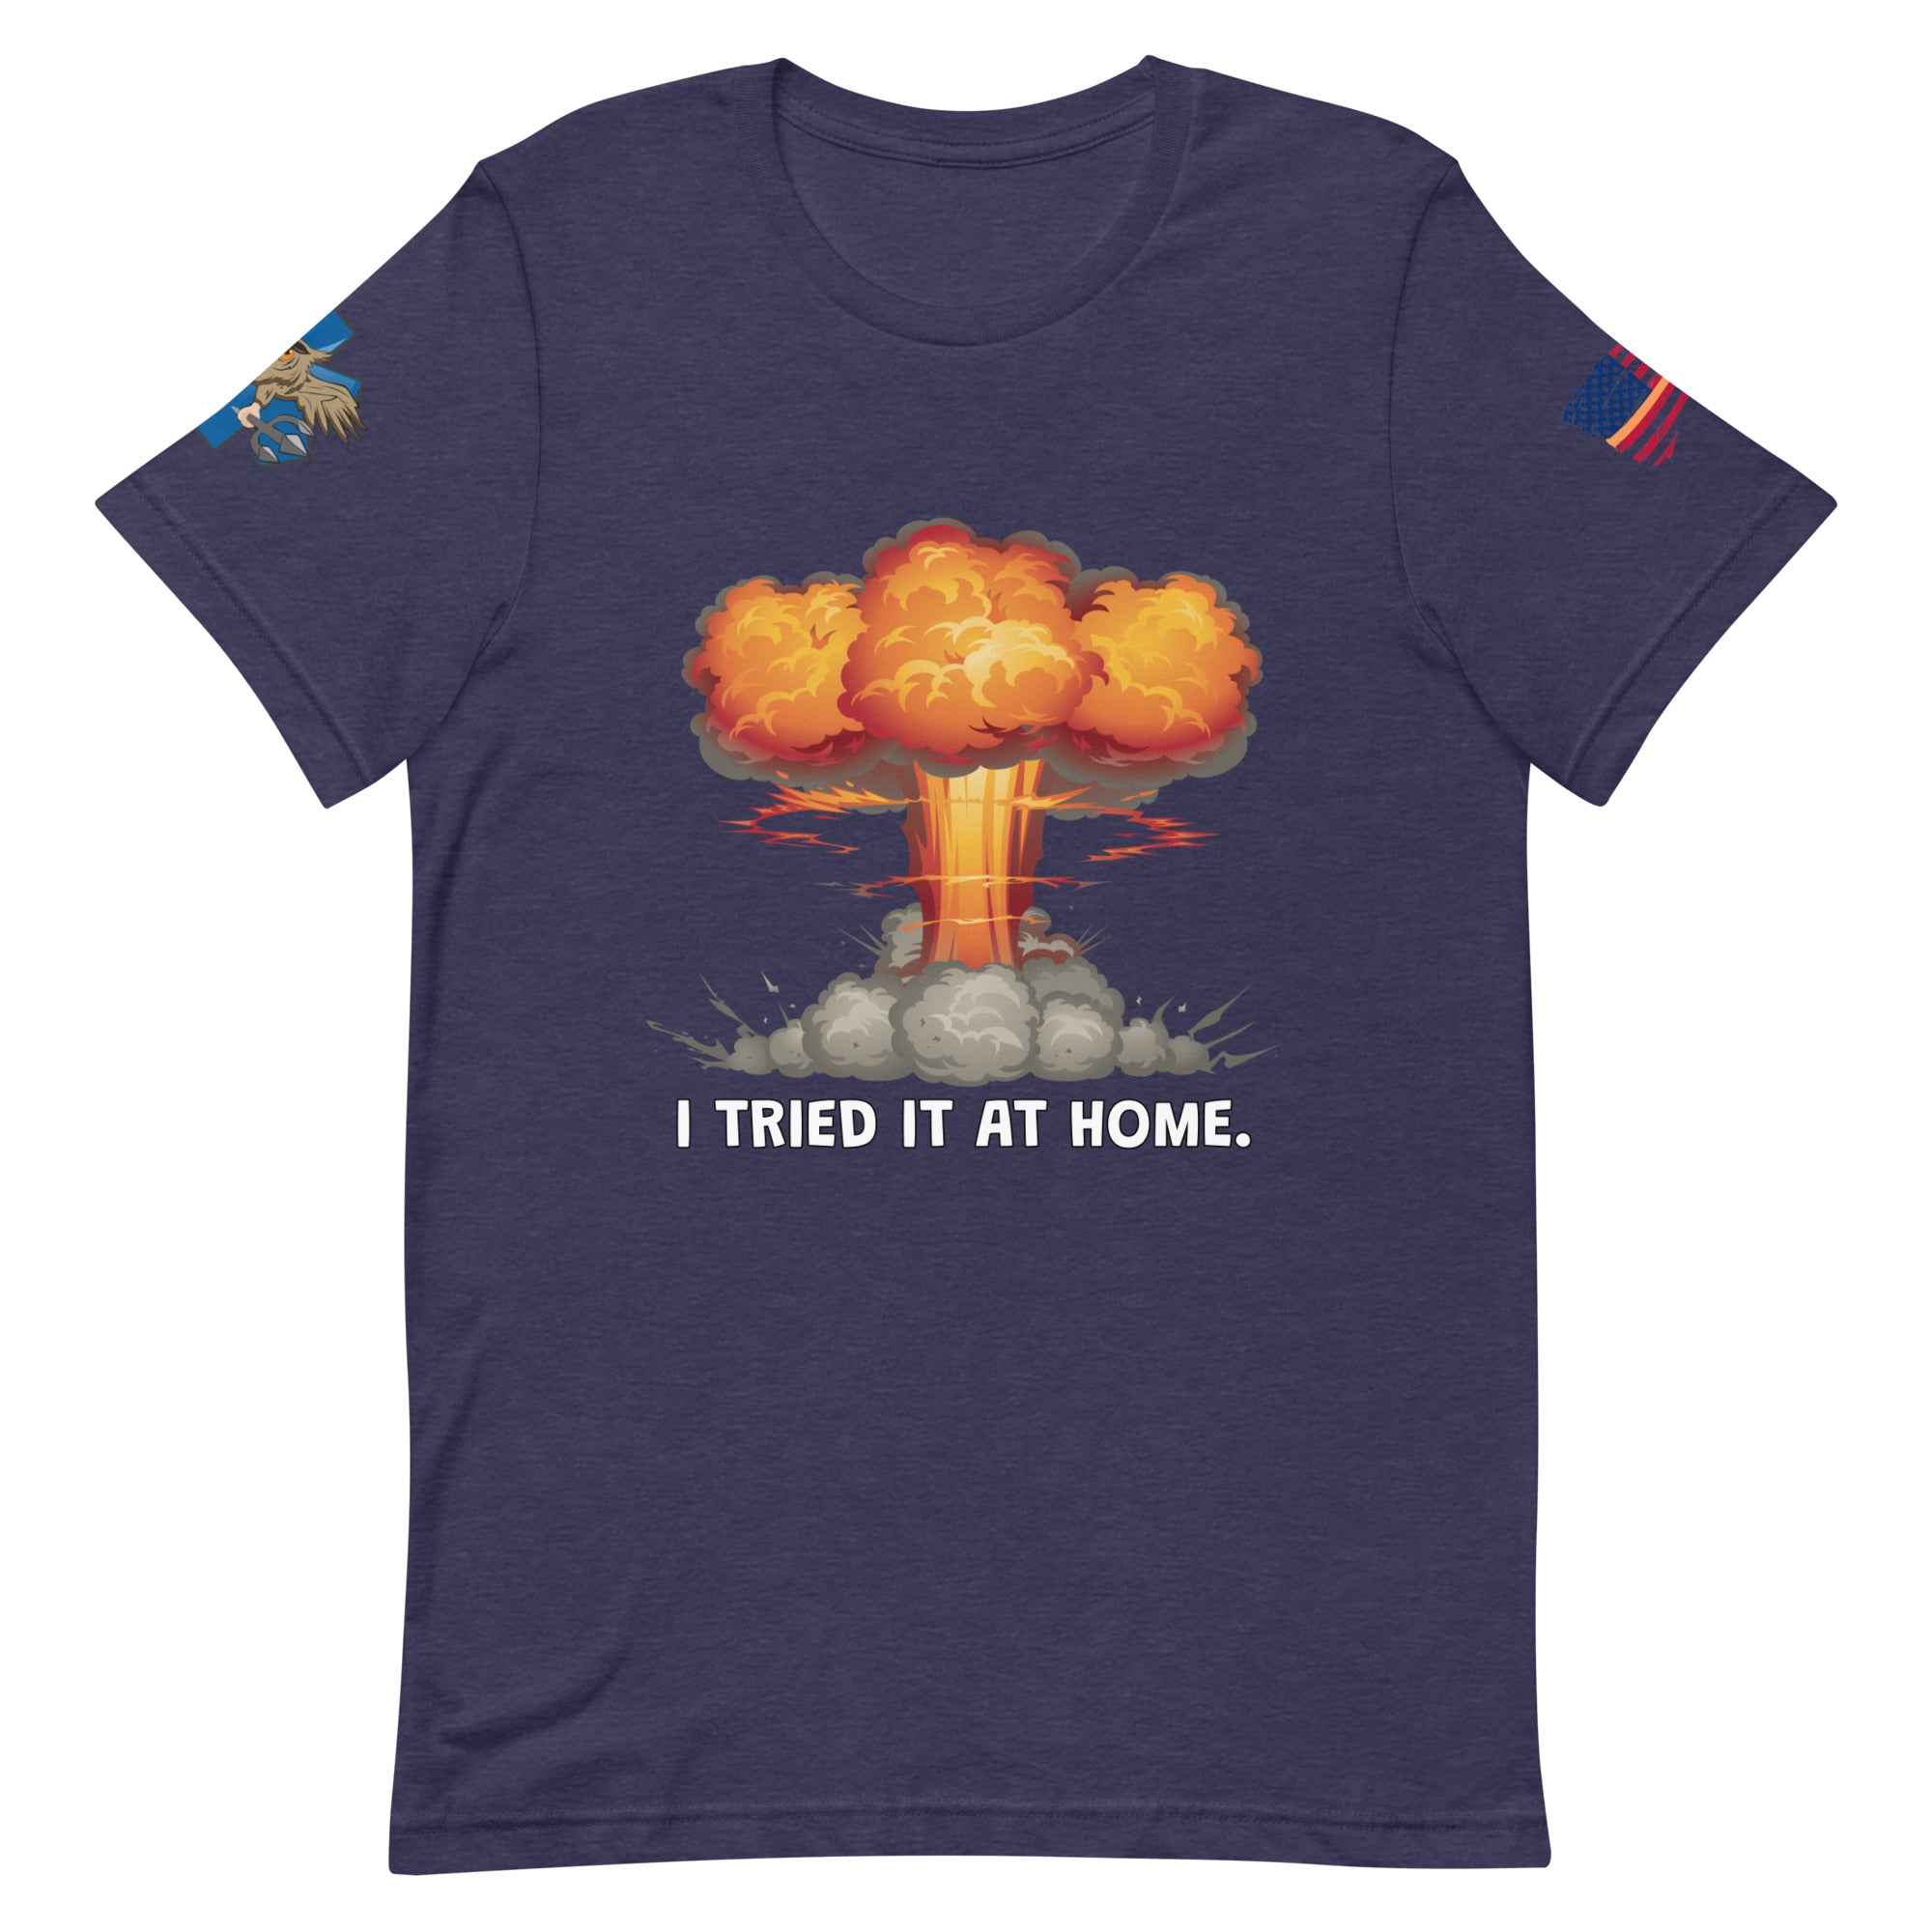 'I Tried It At Home' t-shirt